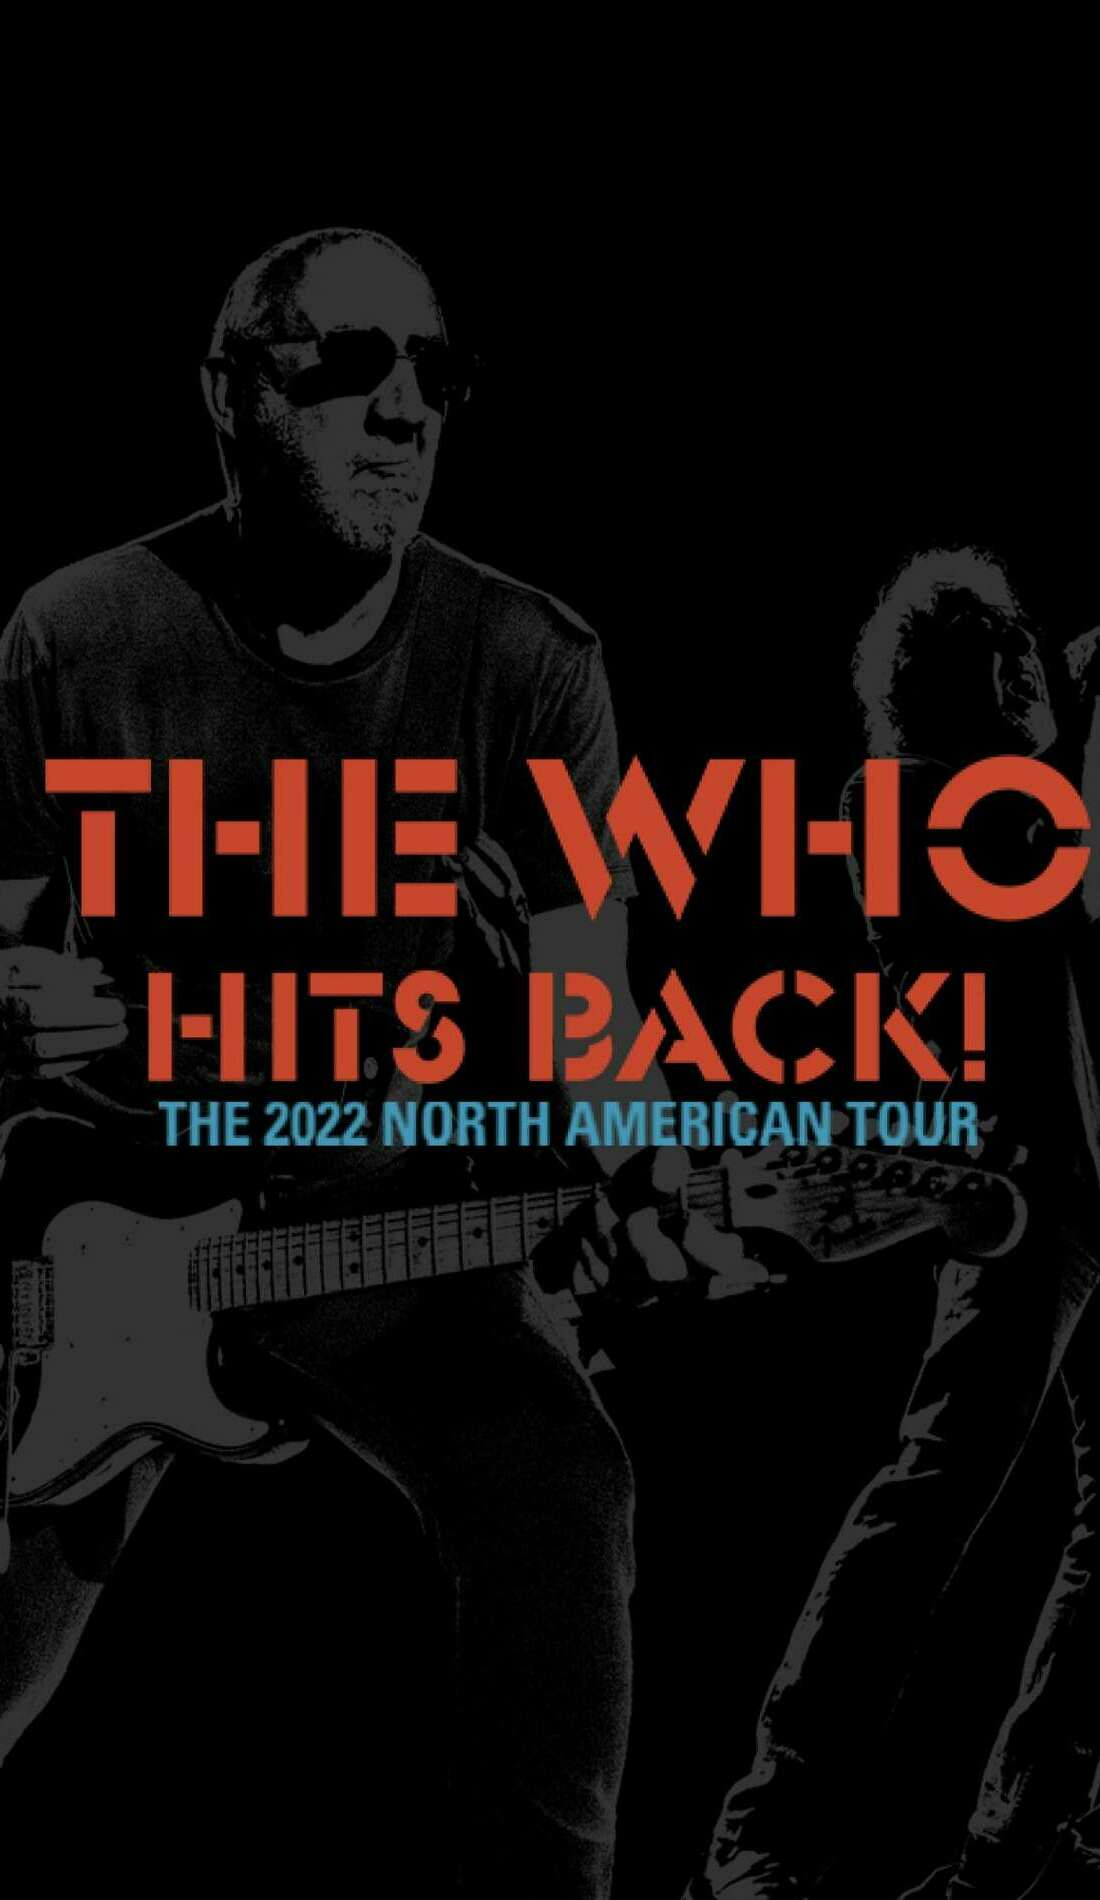 A The Who live event